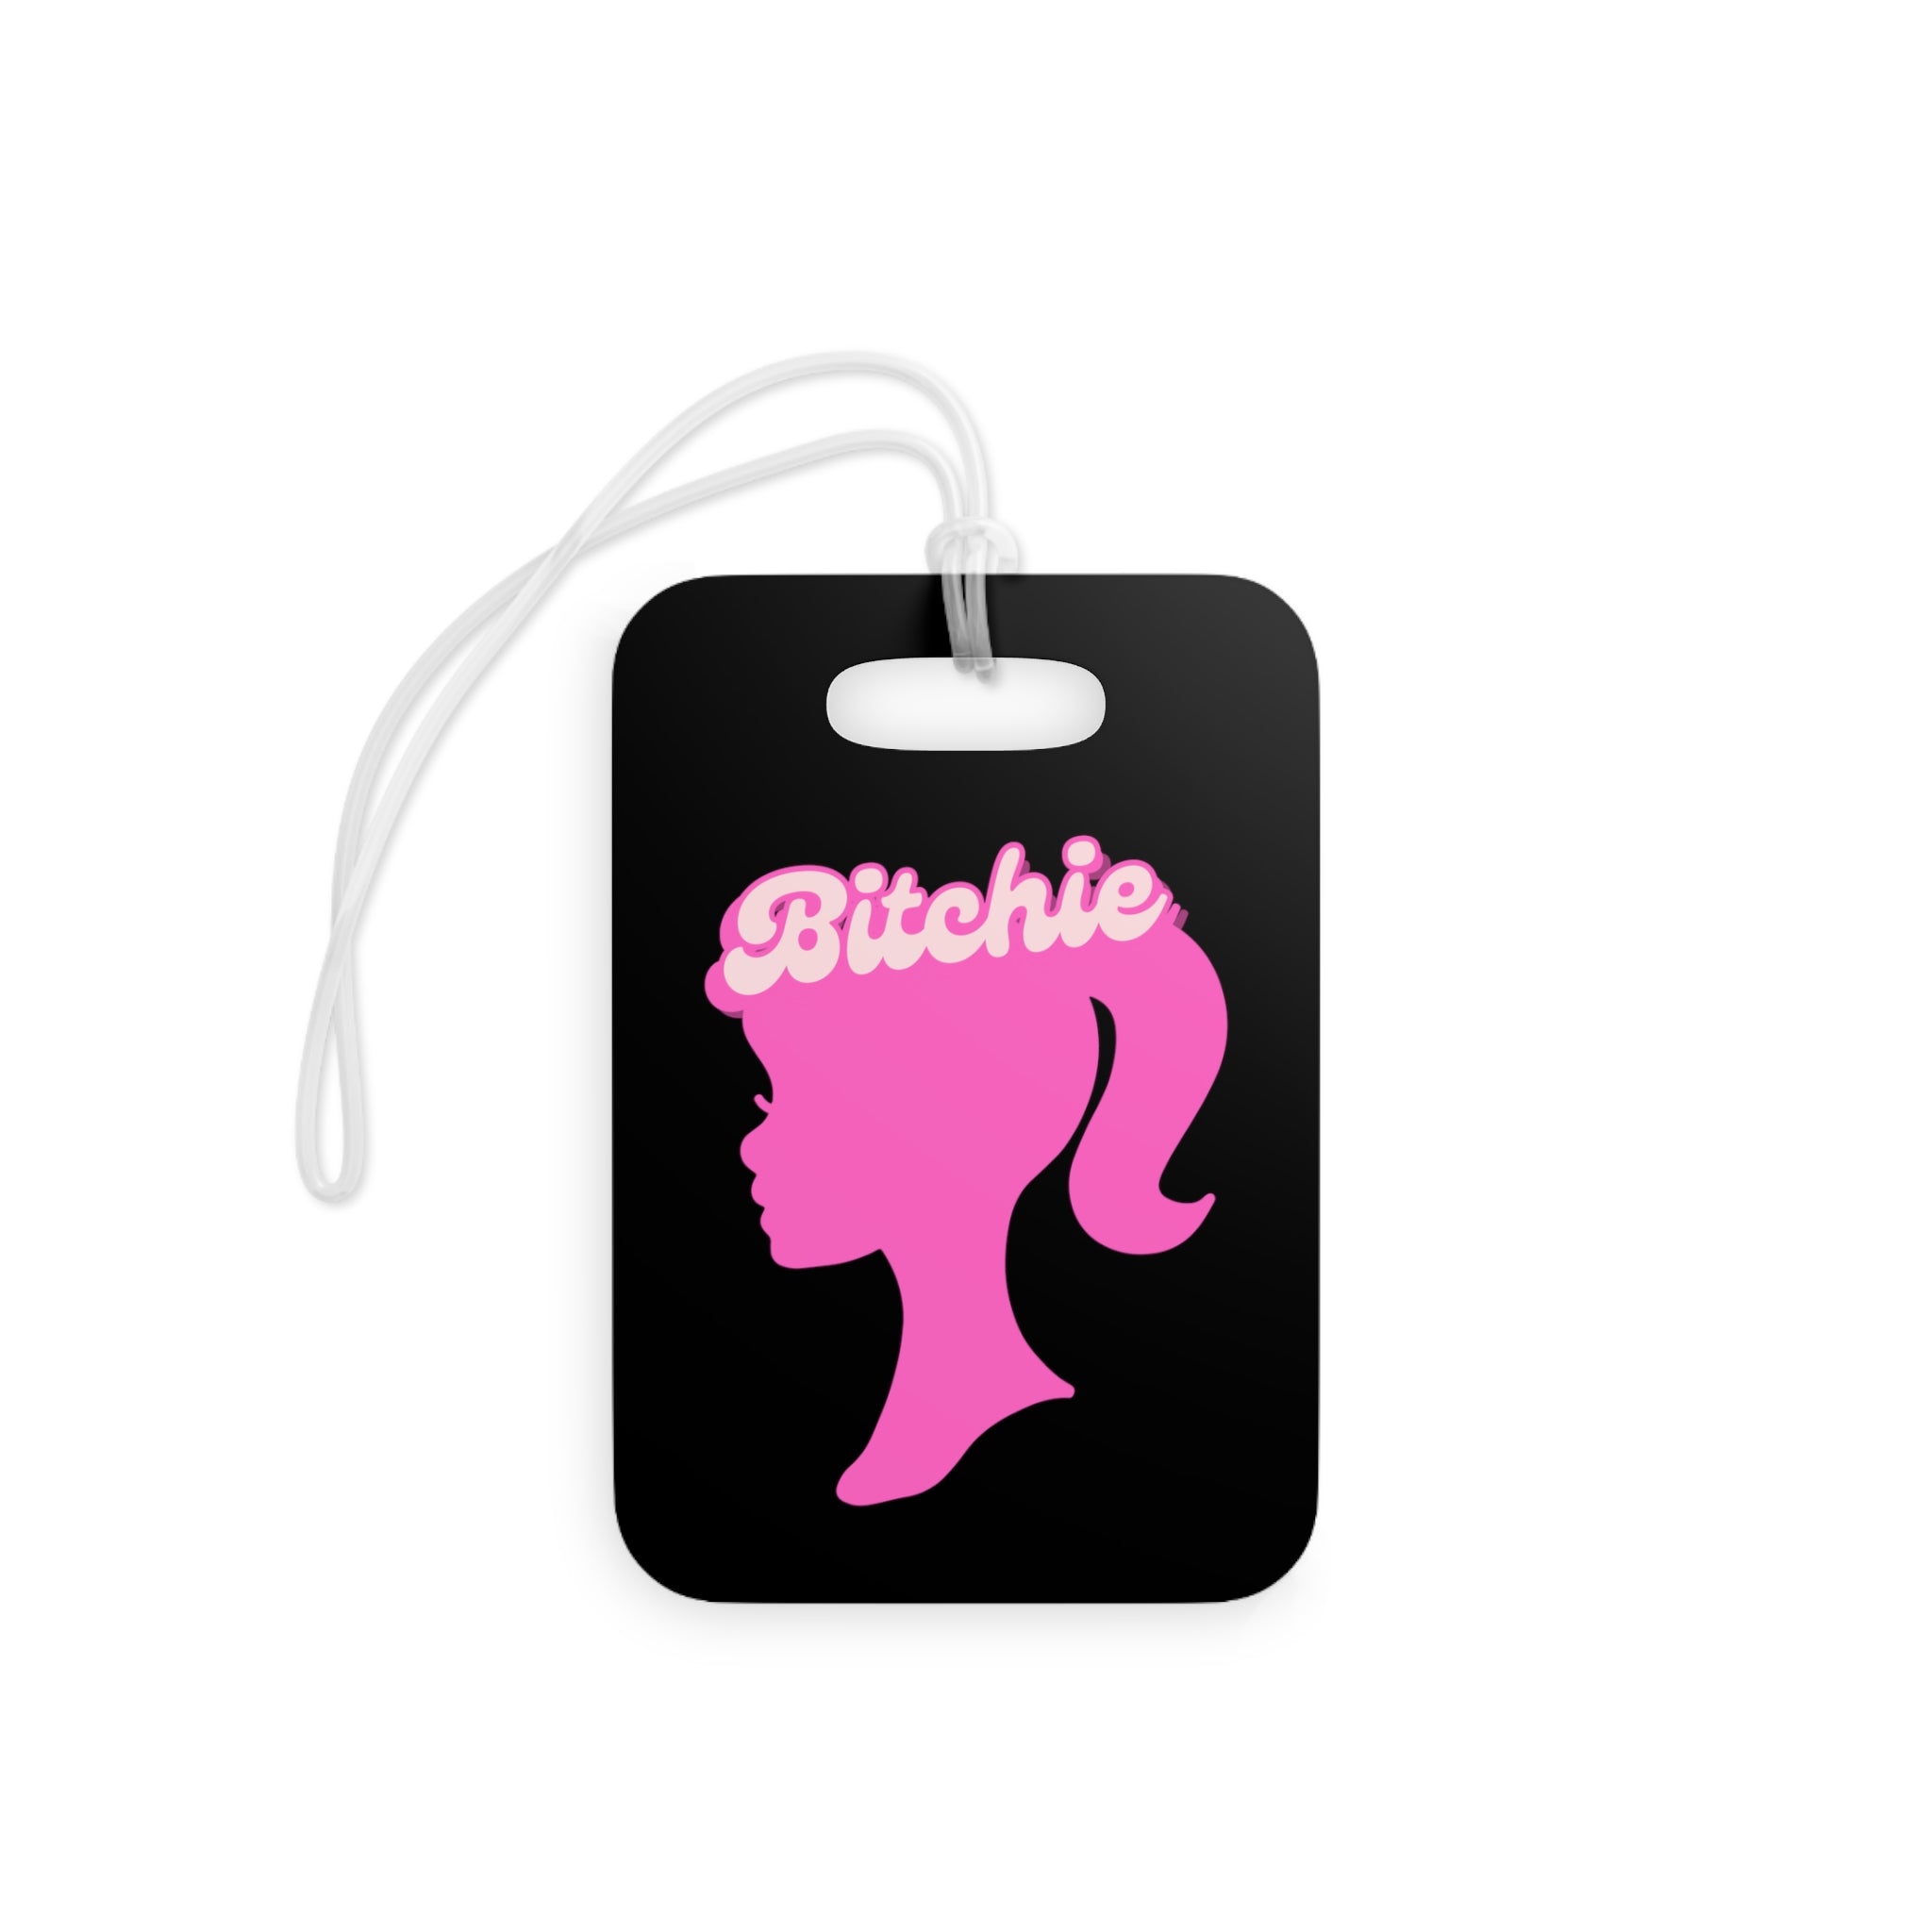  Bitchie (Barbie Image) Funny Luggage Tag in Black, Barbie Bag Tag, Funny Travel Lover Gift, Gift For Her Luggage TagRectangleOnesize